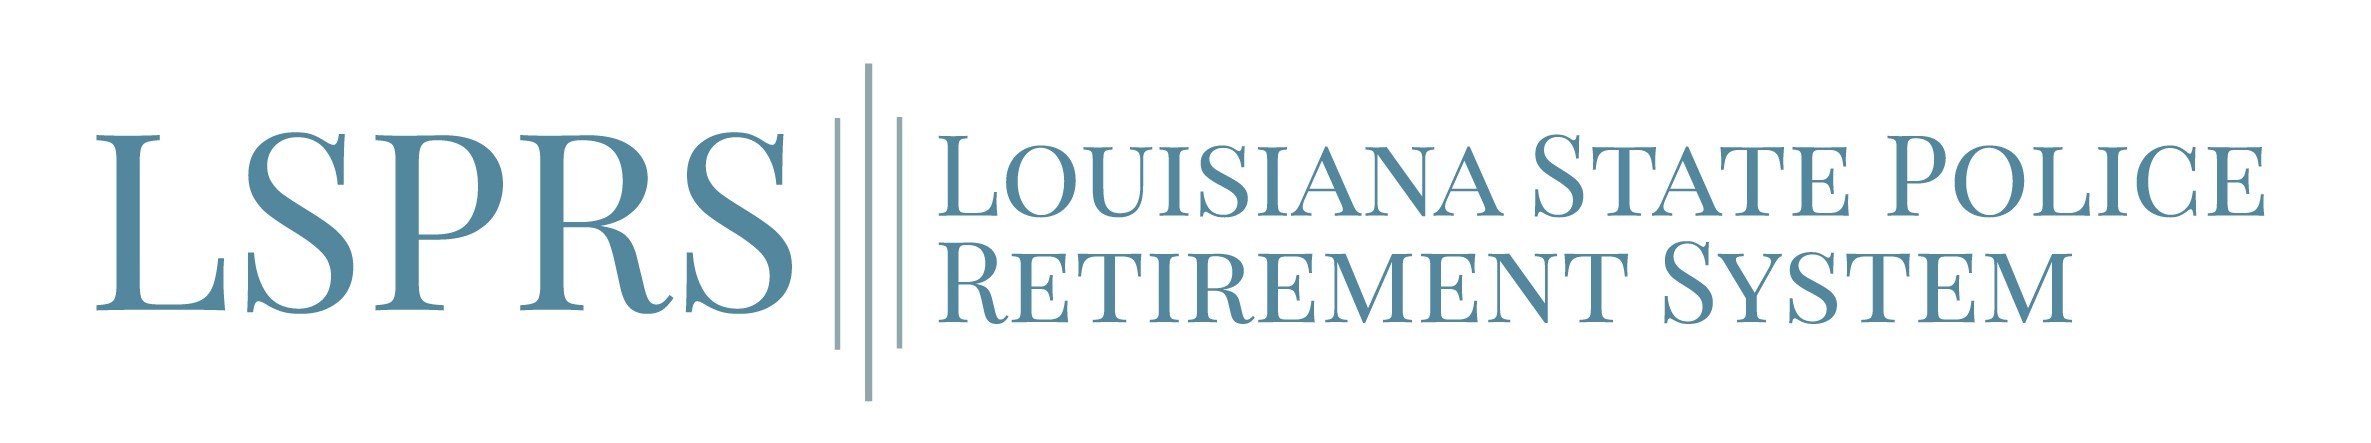 Louisiana State Police Retirement System